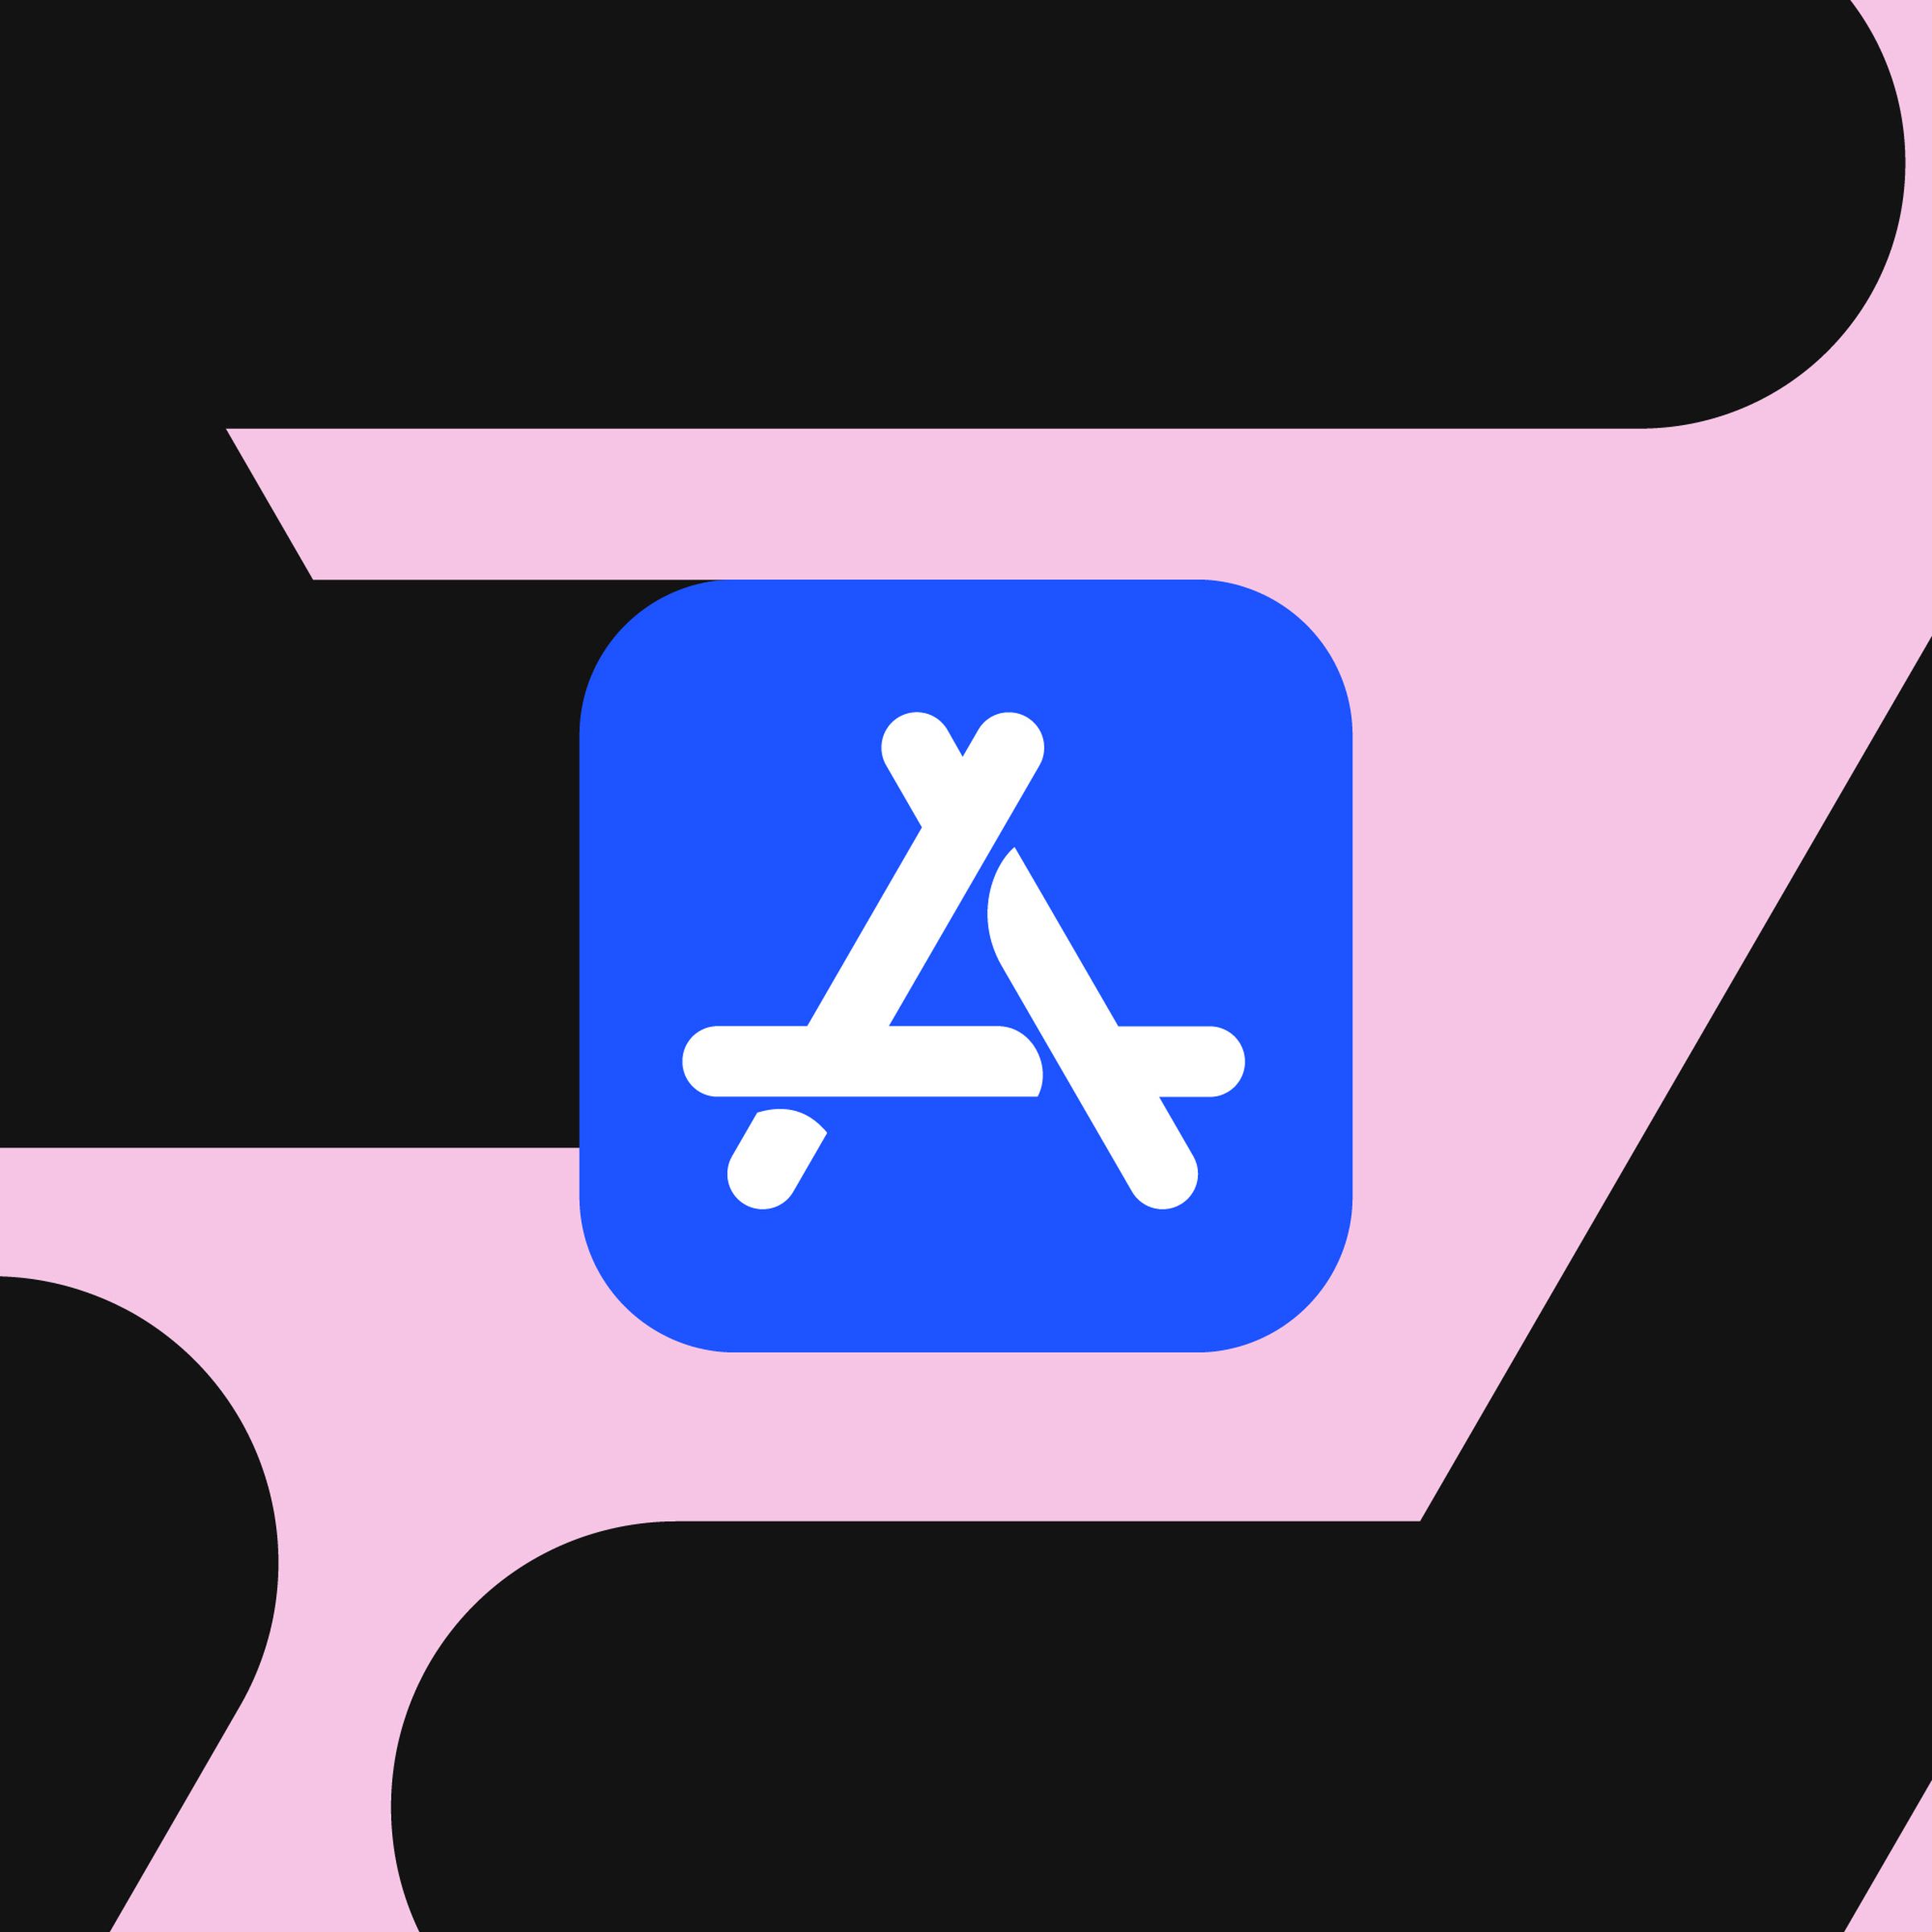 The image displays Apple’s blue App Store logo in front of a pink and black background.